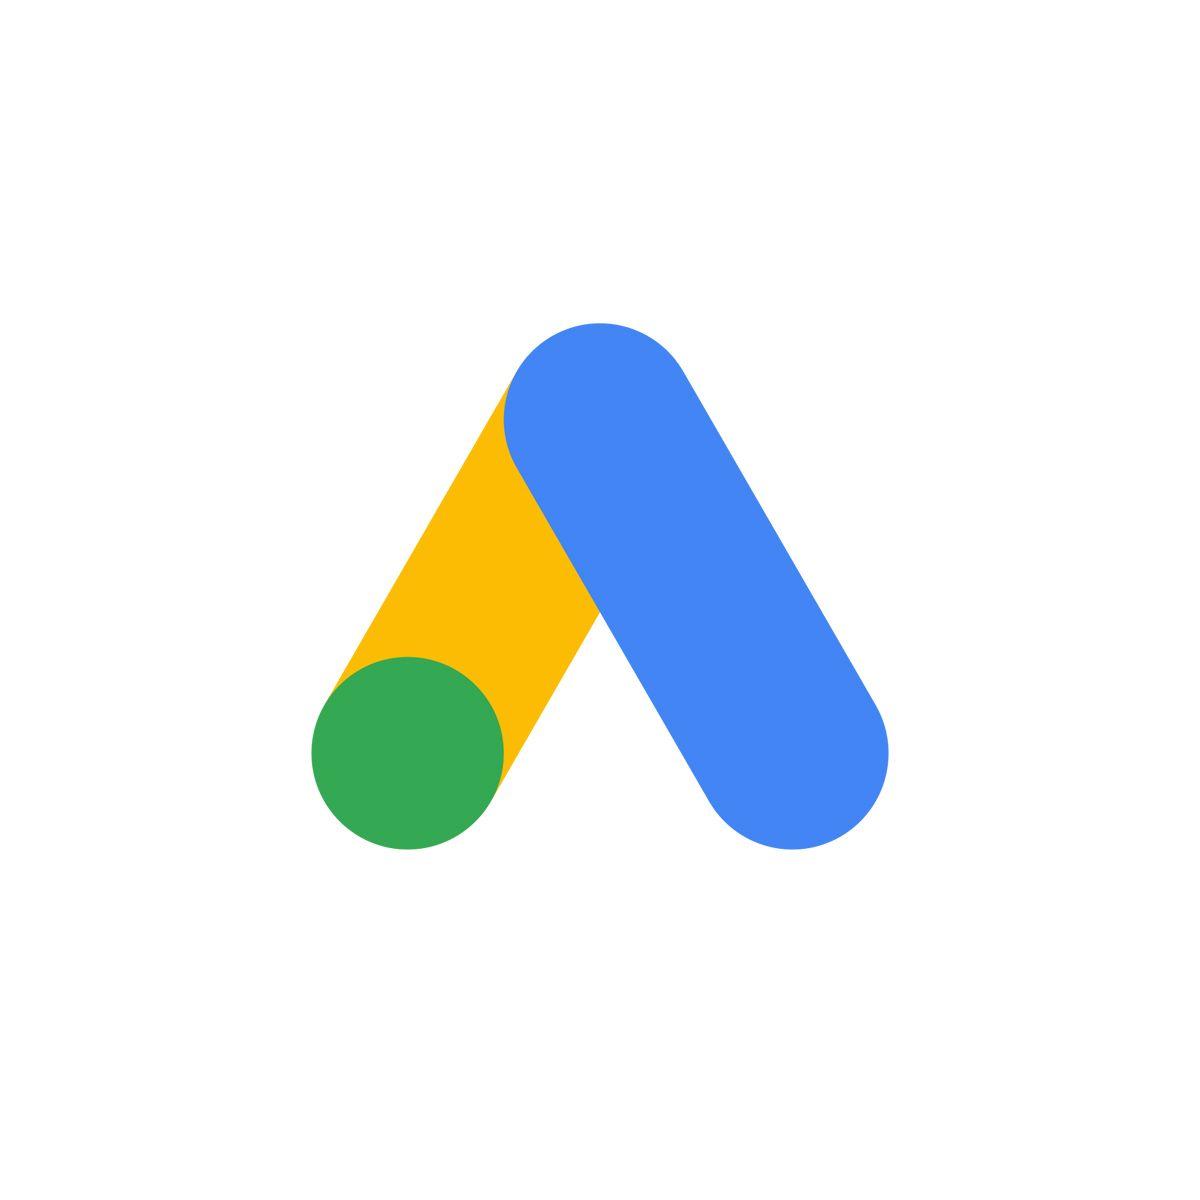 Google Display Network Logo - Google Ads - Get More Customers With Easy Online Advertising